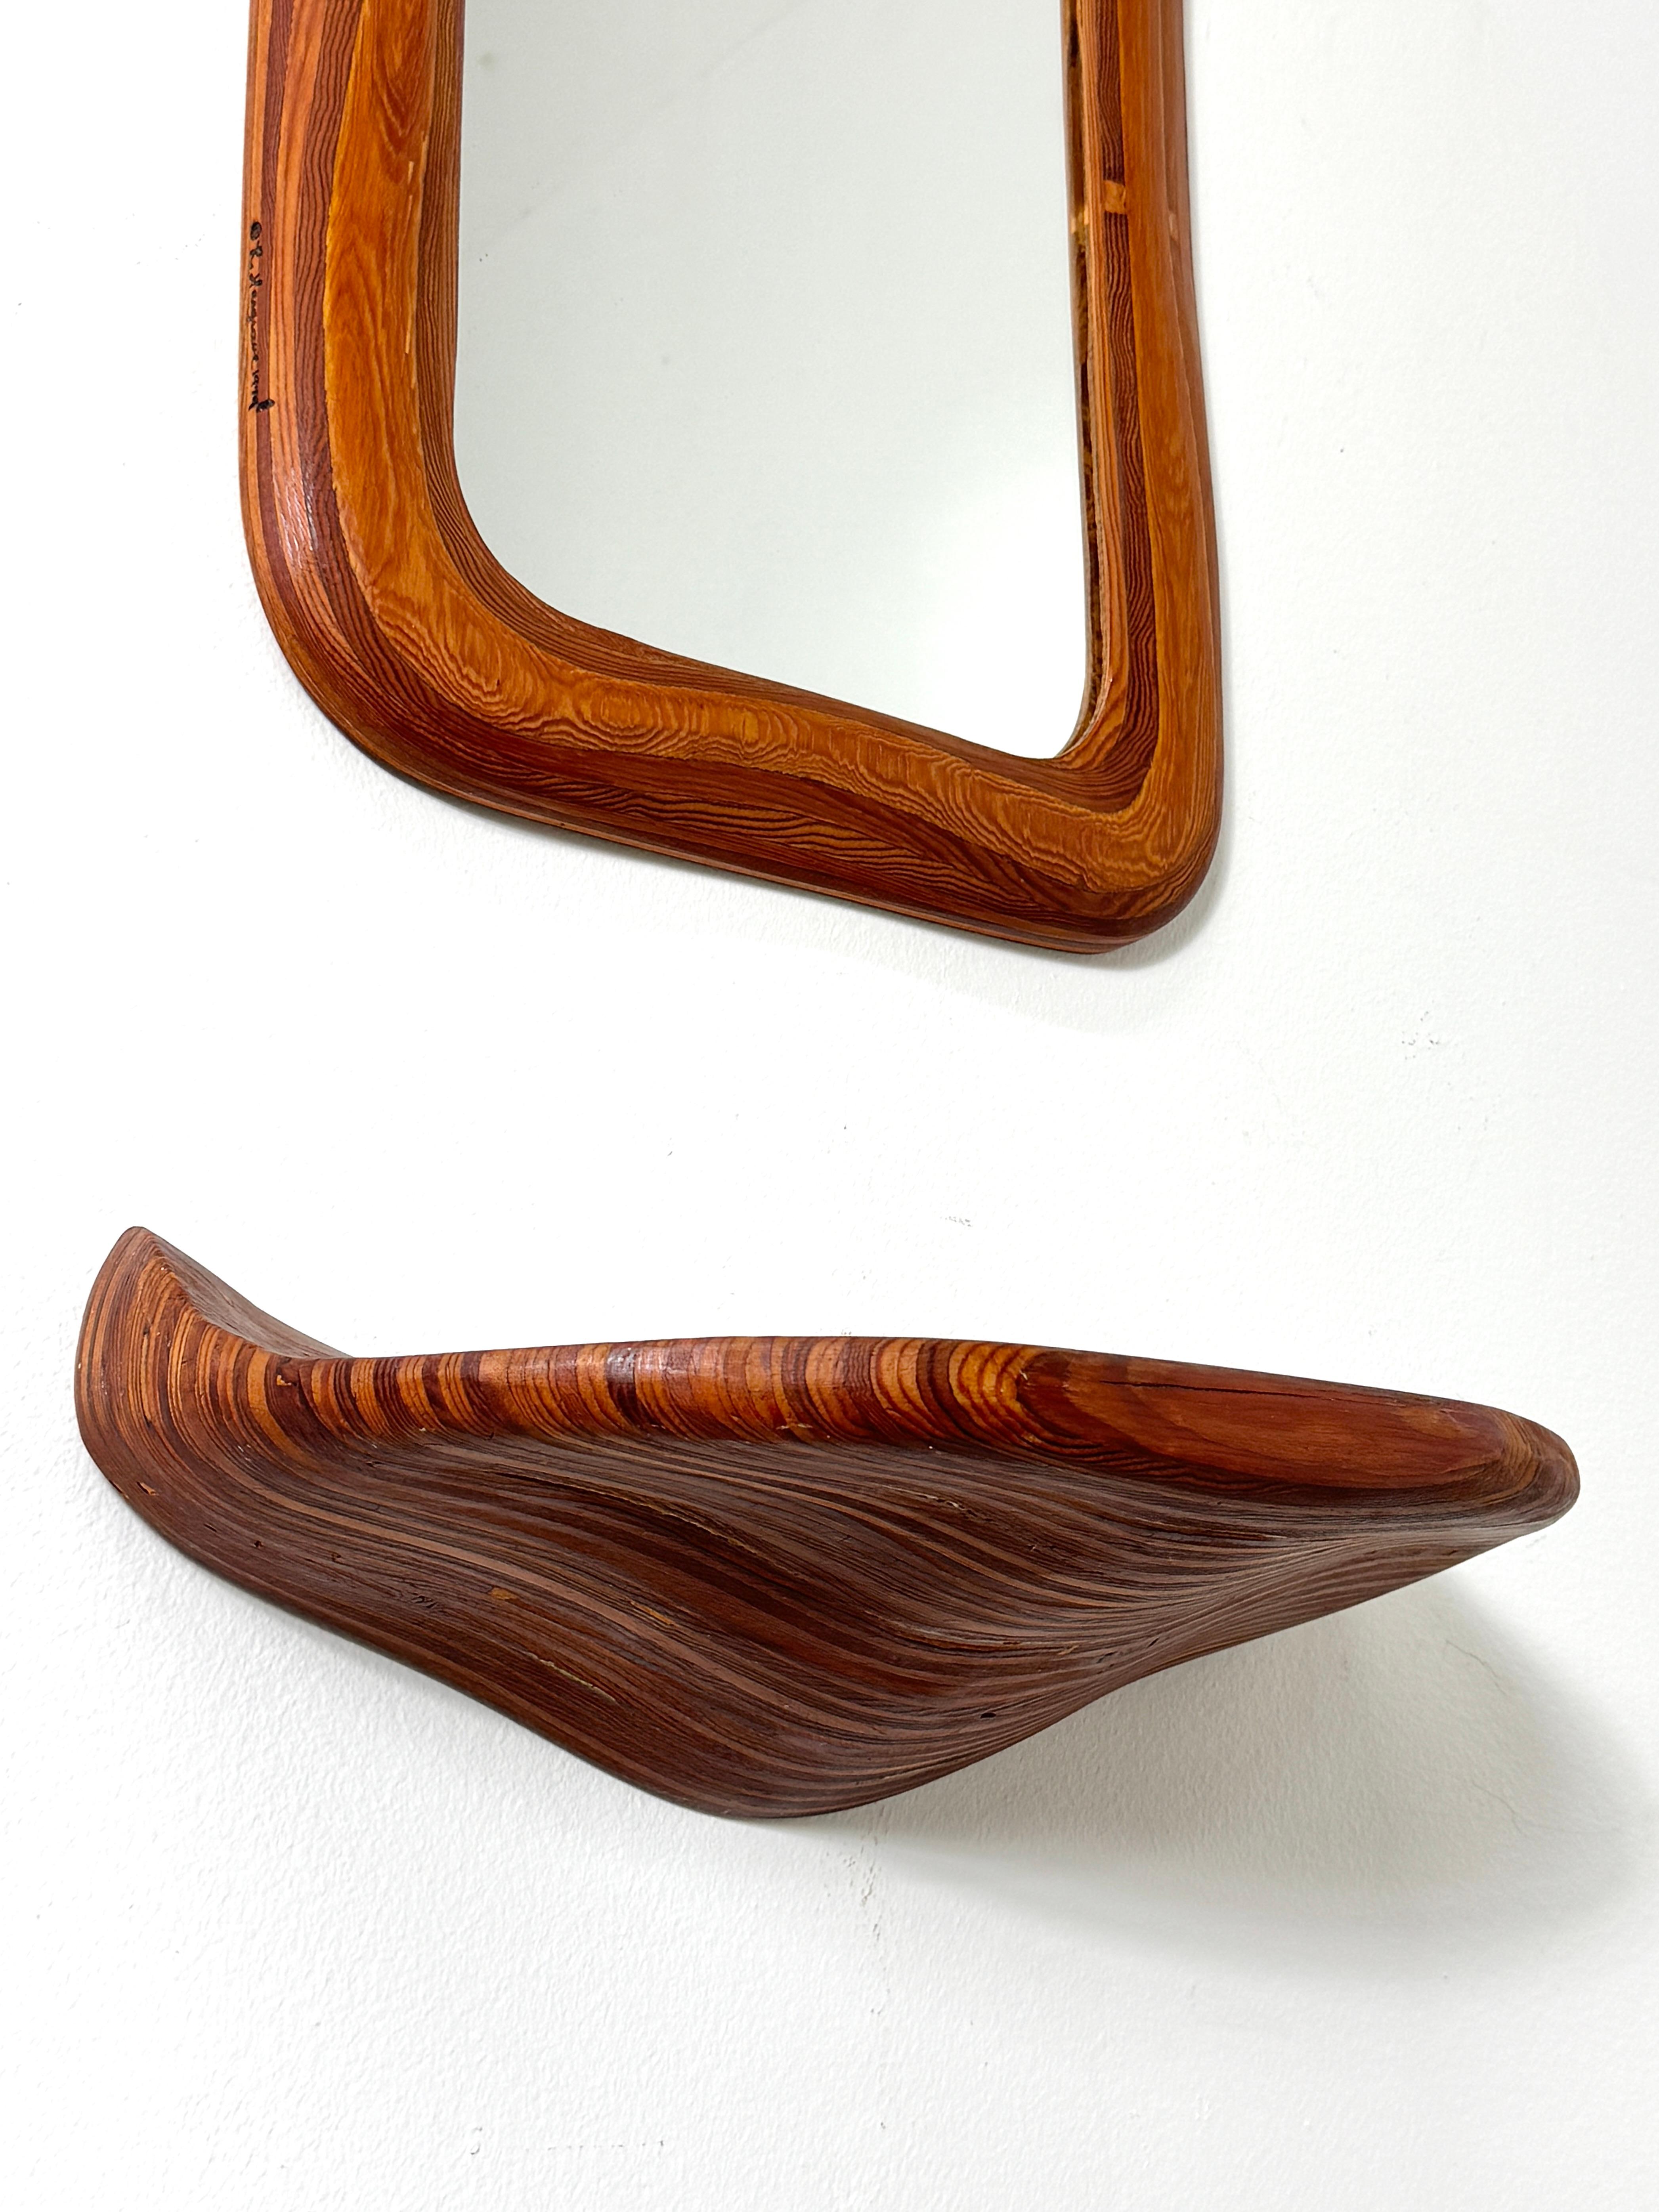 Late 20th Century American Studio Craft Sculptural Wood Wall Shelf and Mirror by Robert Hargrave For Sale